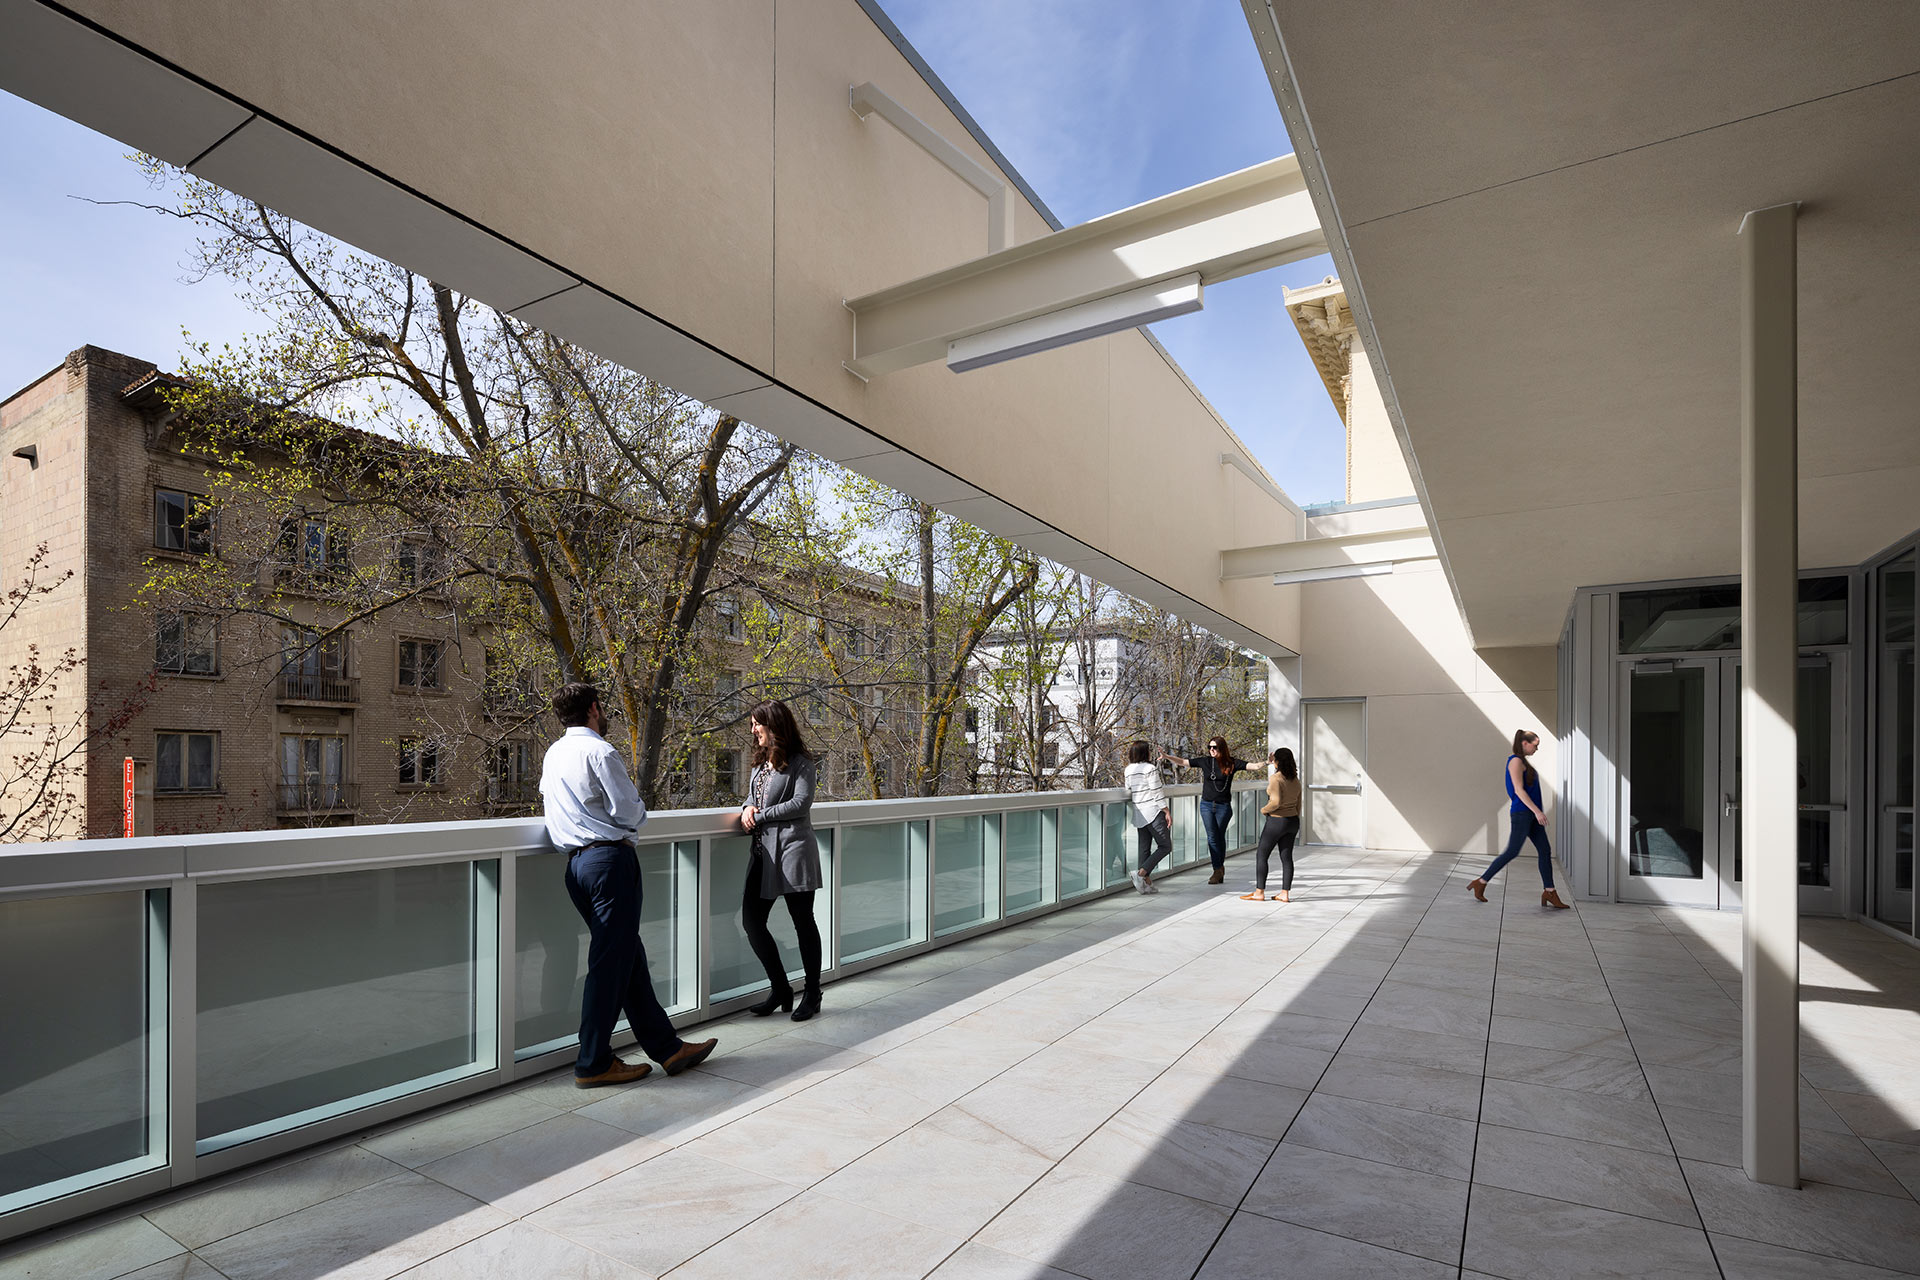 Exterior at UC Center Sacramento academic facility, multiple groups of people gather on an upper level outdoor space with views of the city beyond